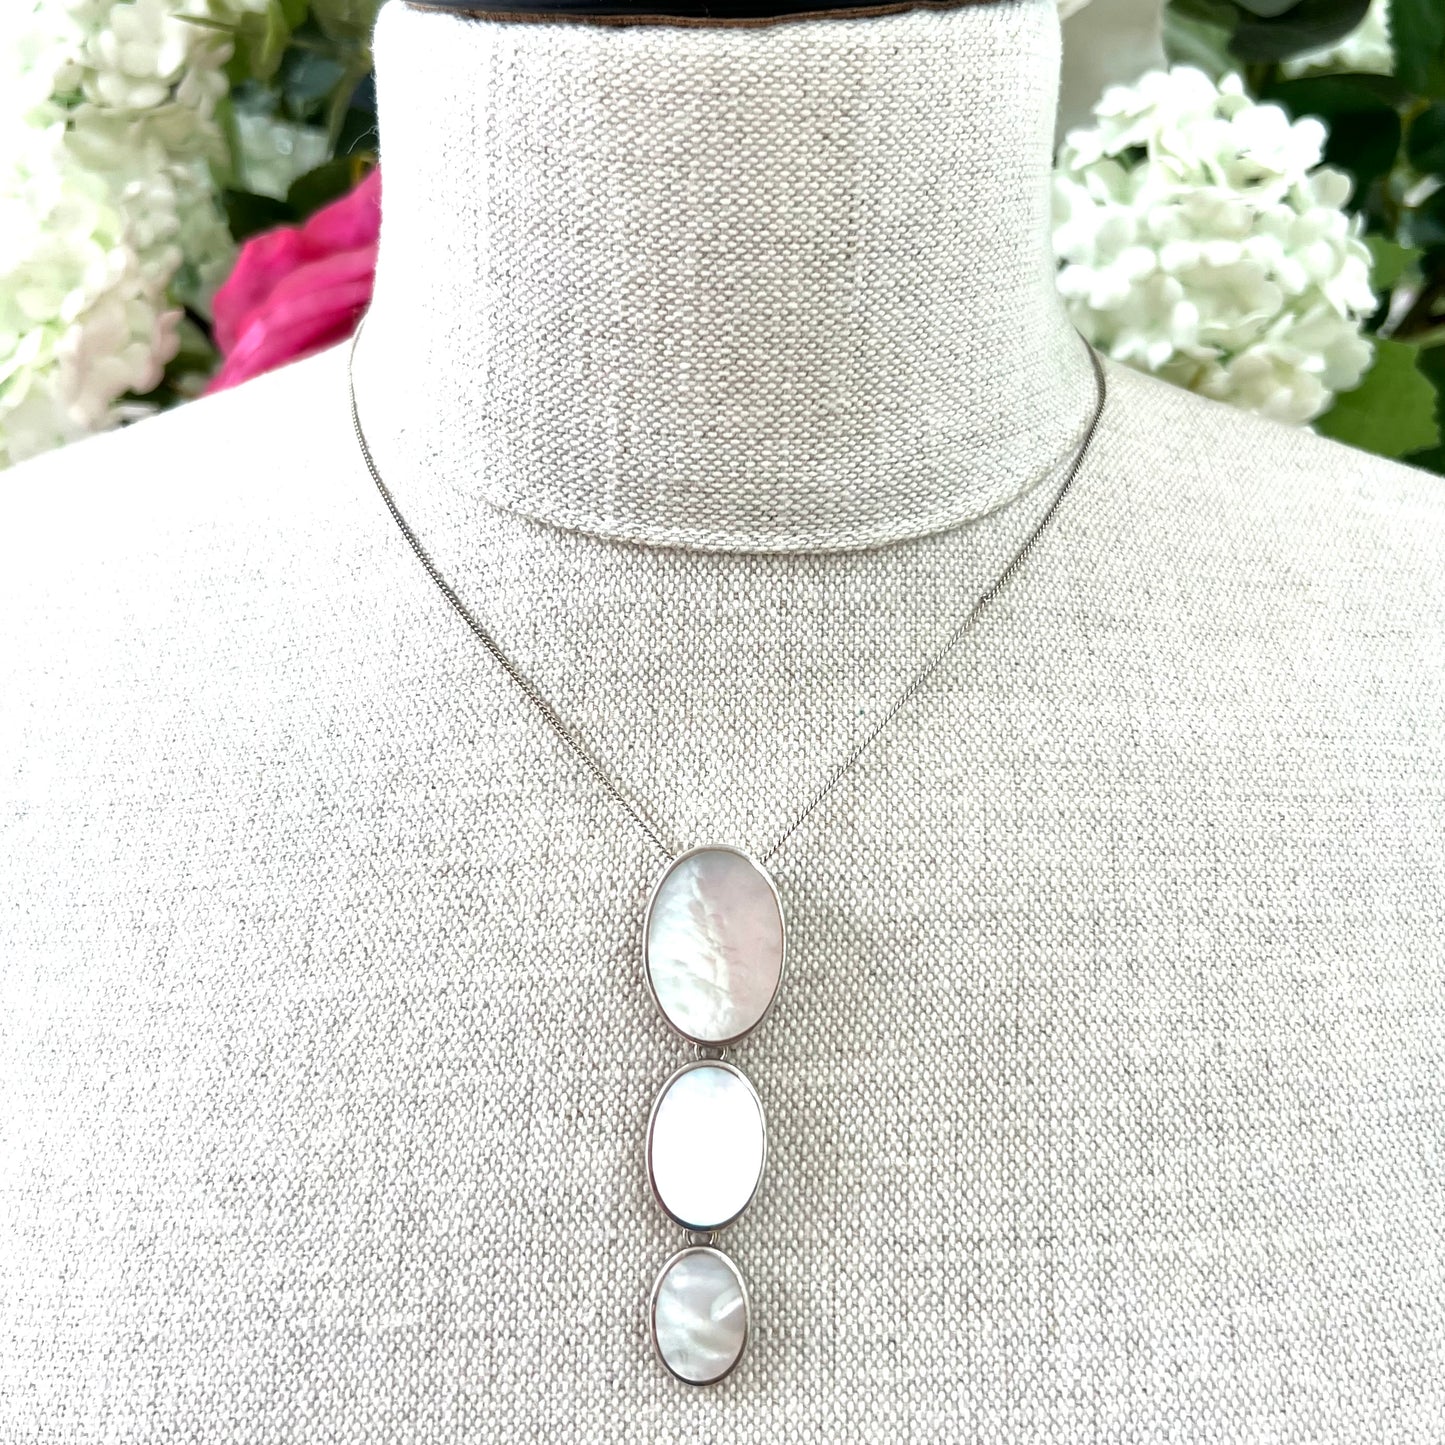 Mother of Pearl and Silver Pendant and Silver Chain